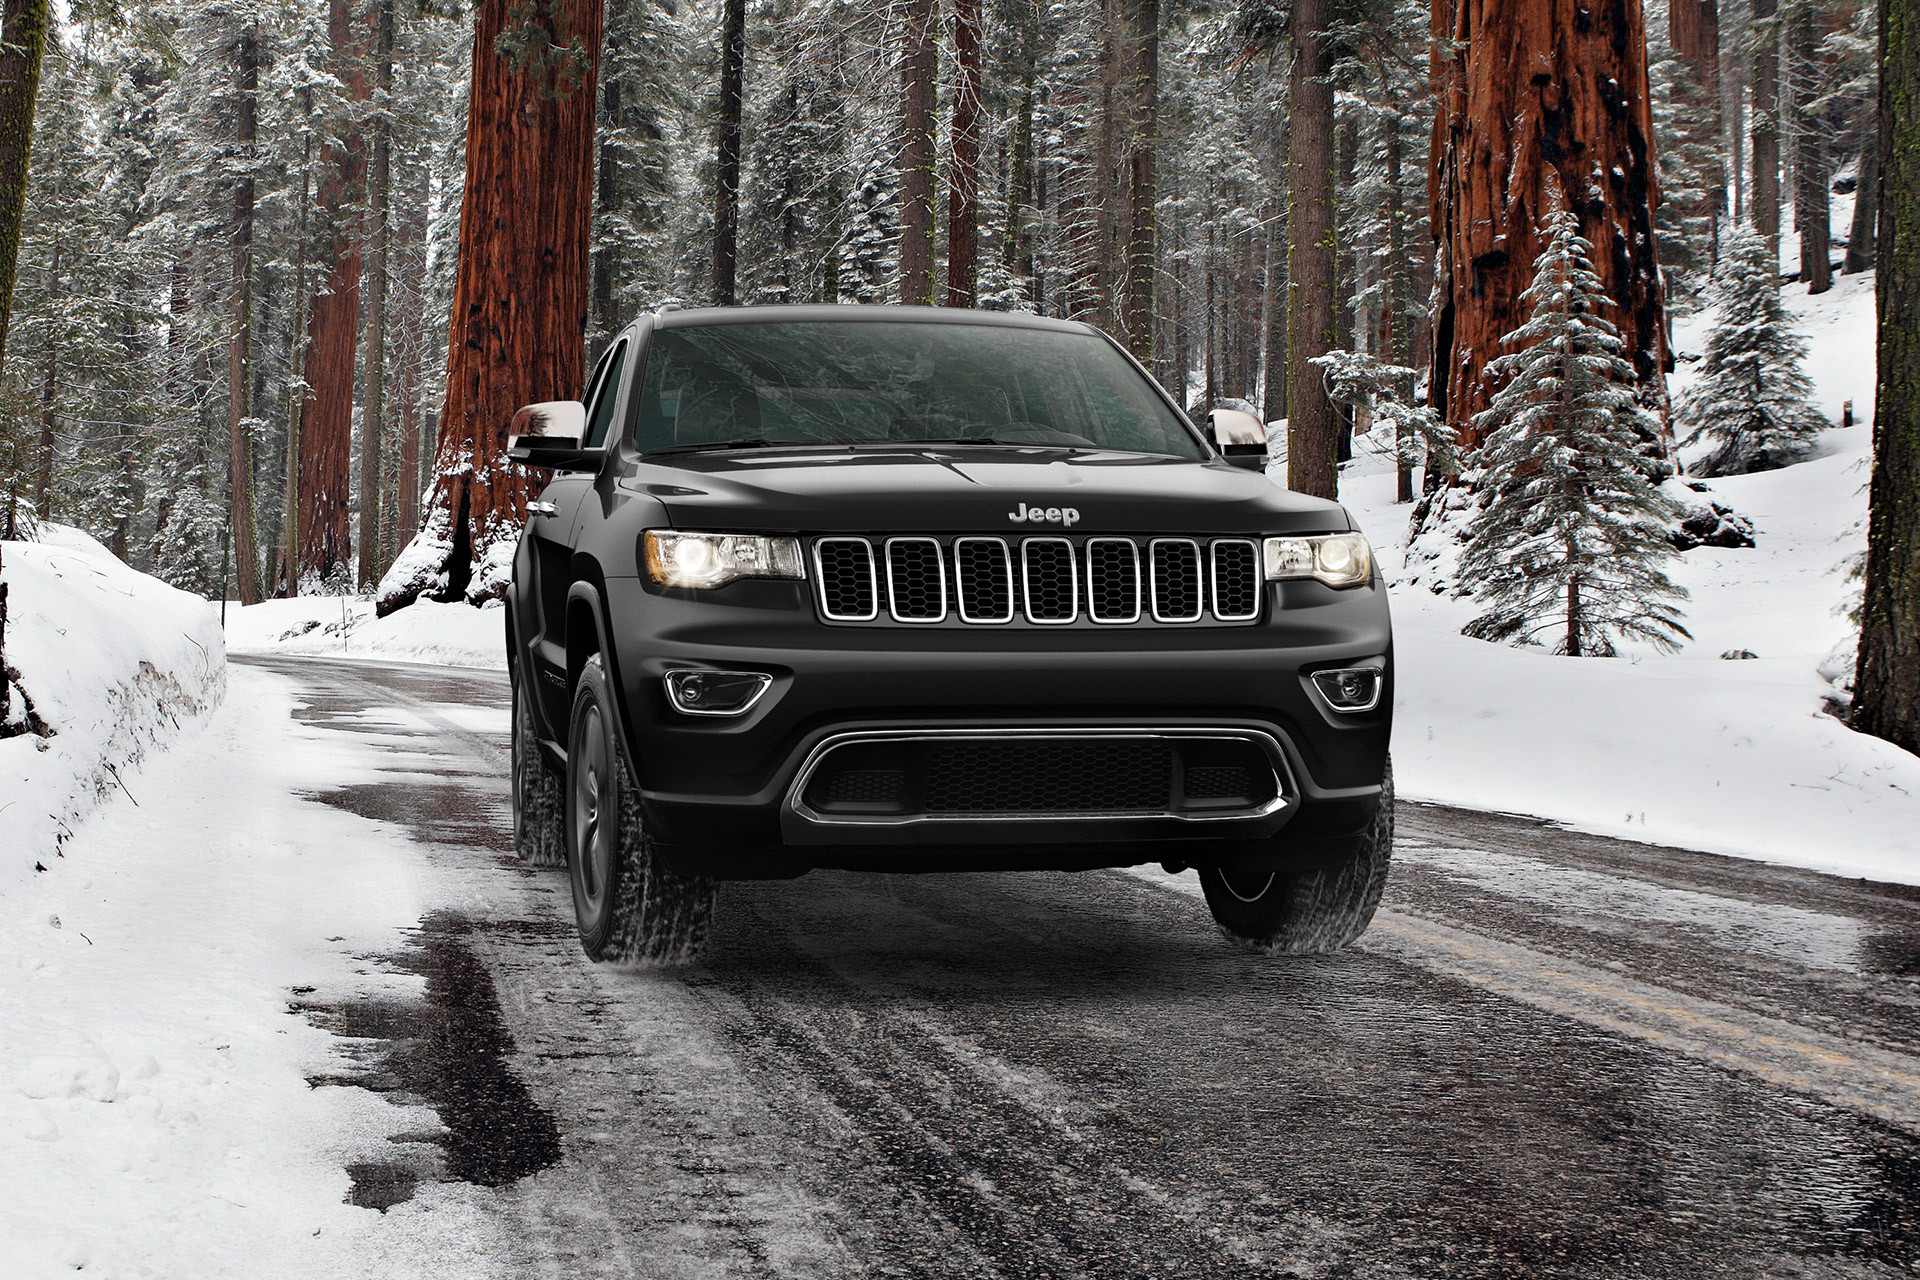 2022 Grand Cherokee WK Limited driving on a snowy road in a forest